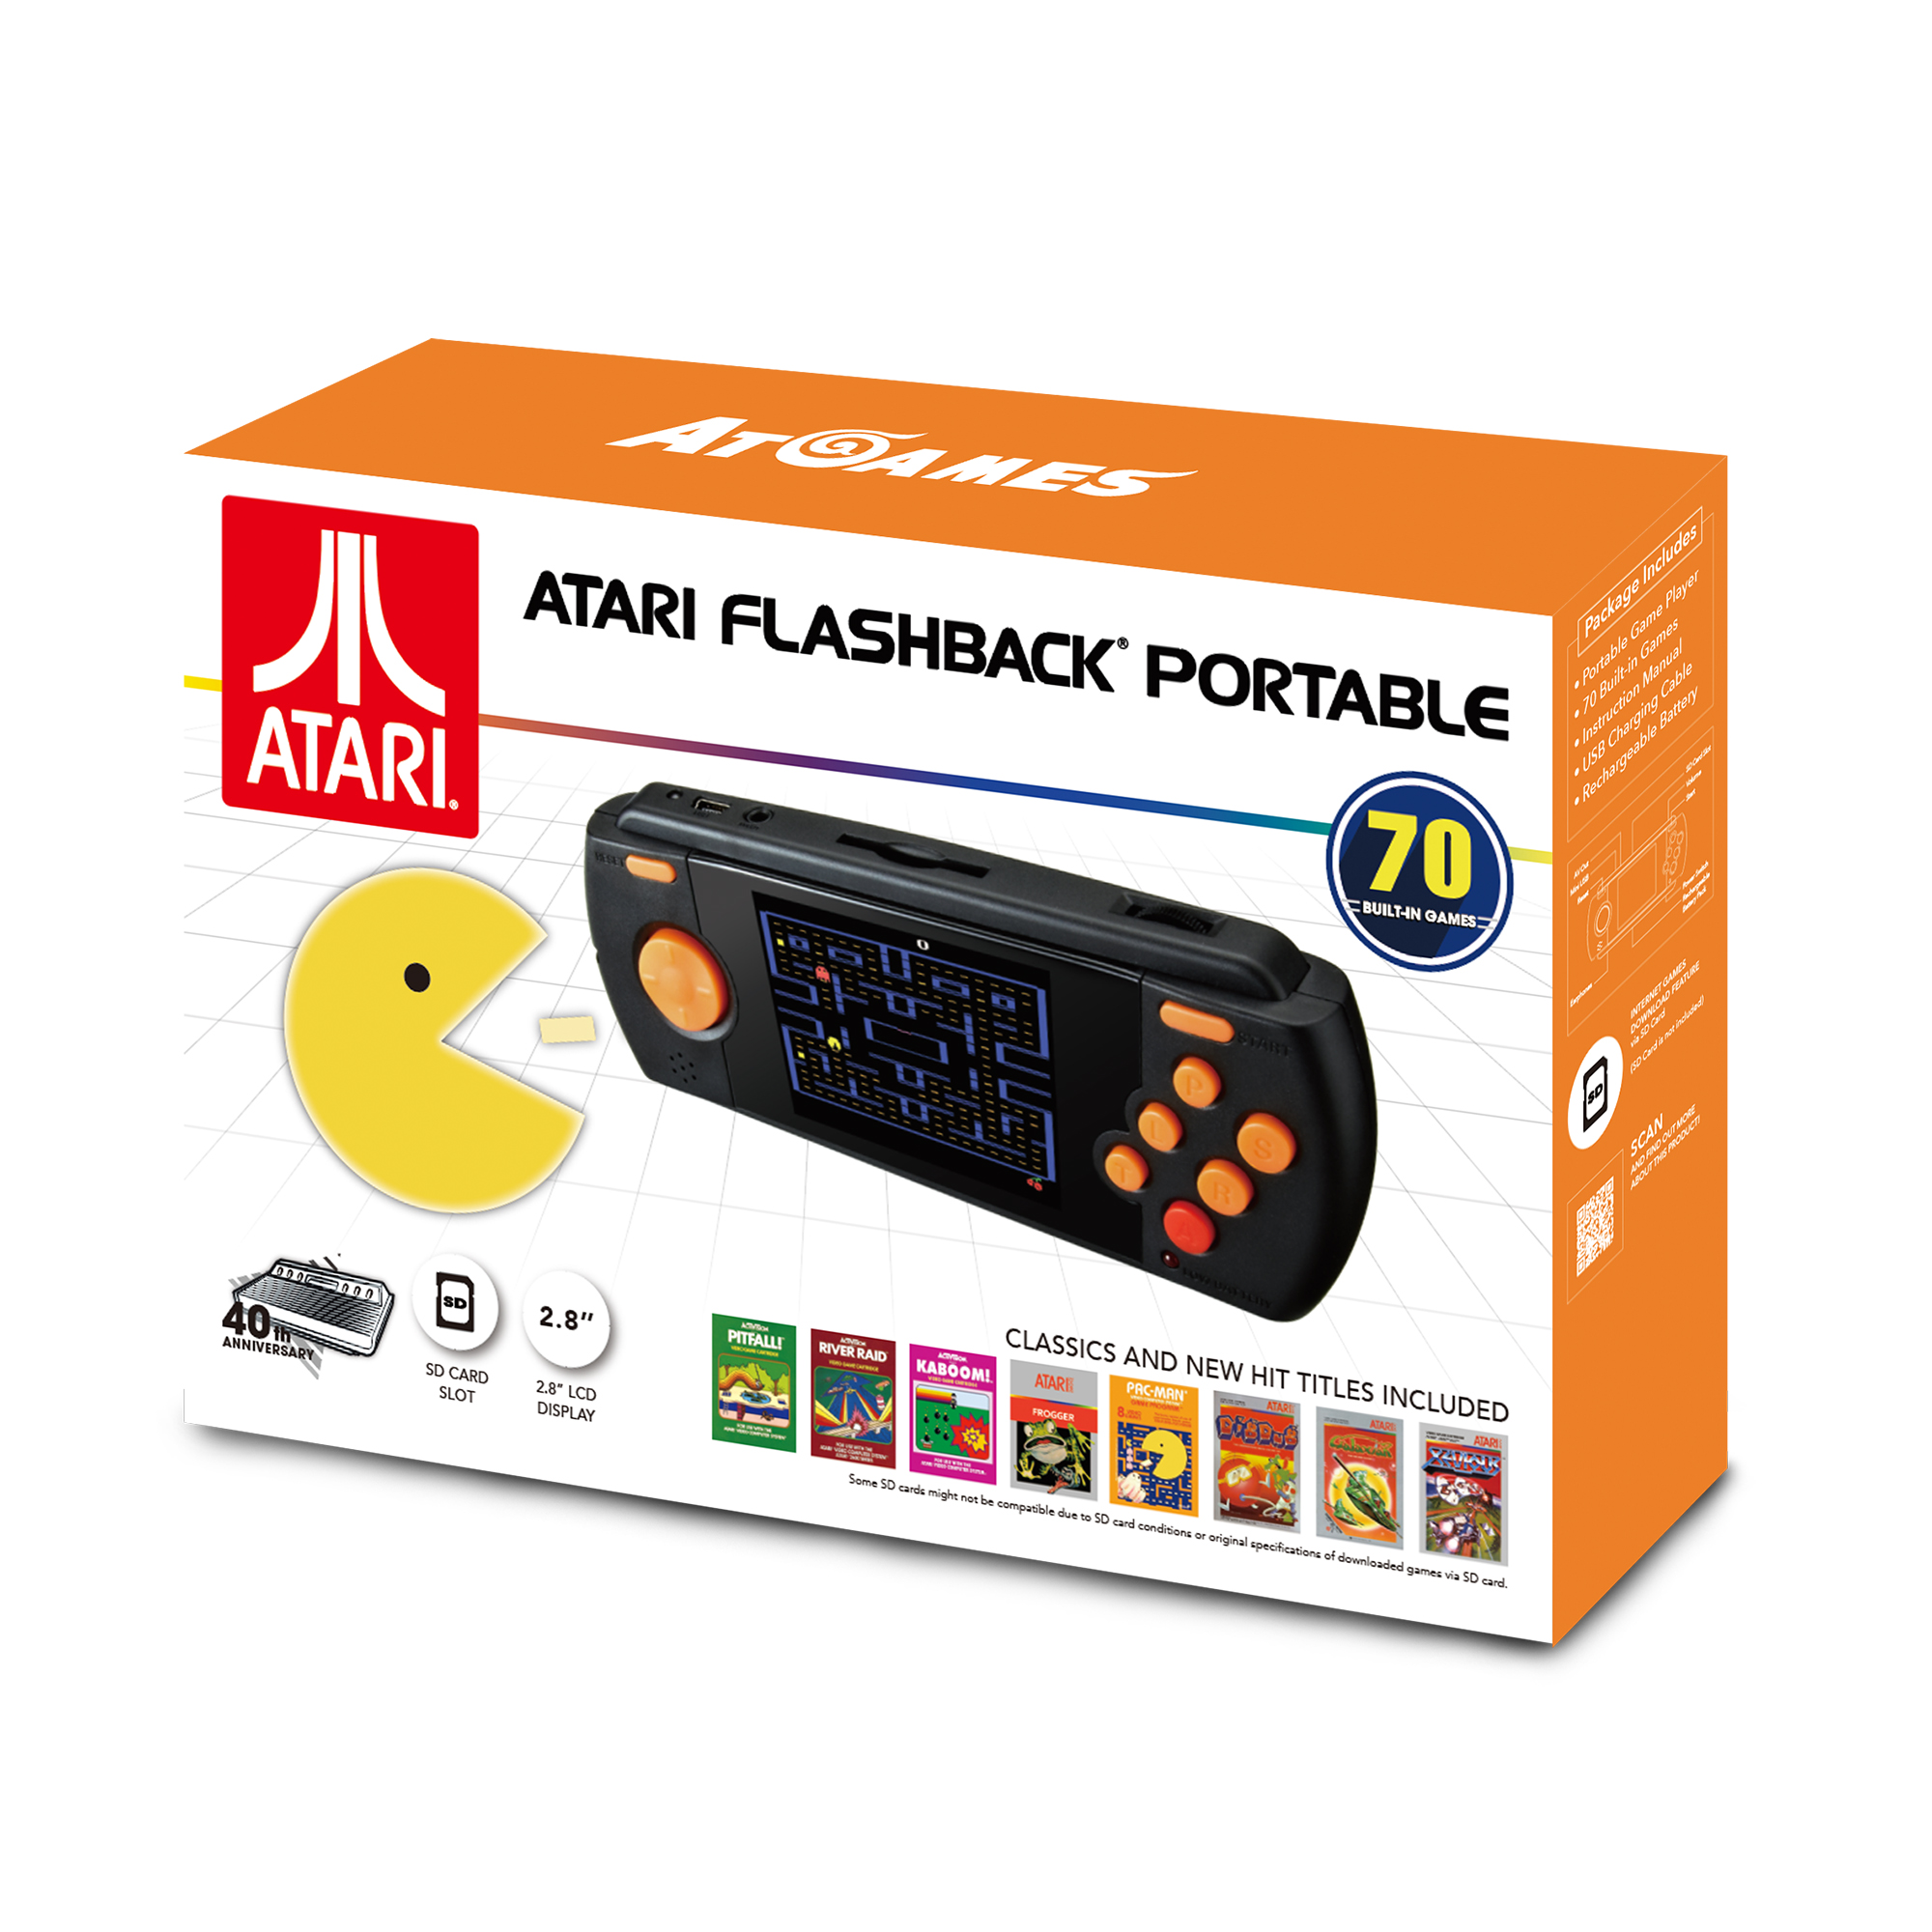 Atari Flashback Portable Game Player - Hand Held Game Console - image 1 of 4